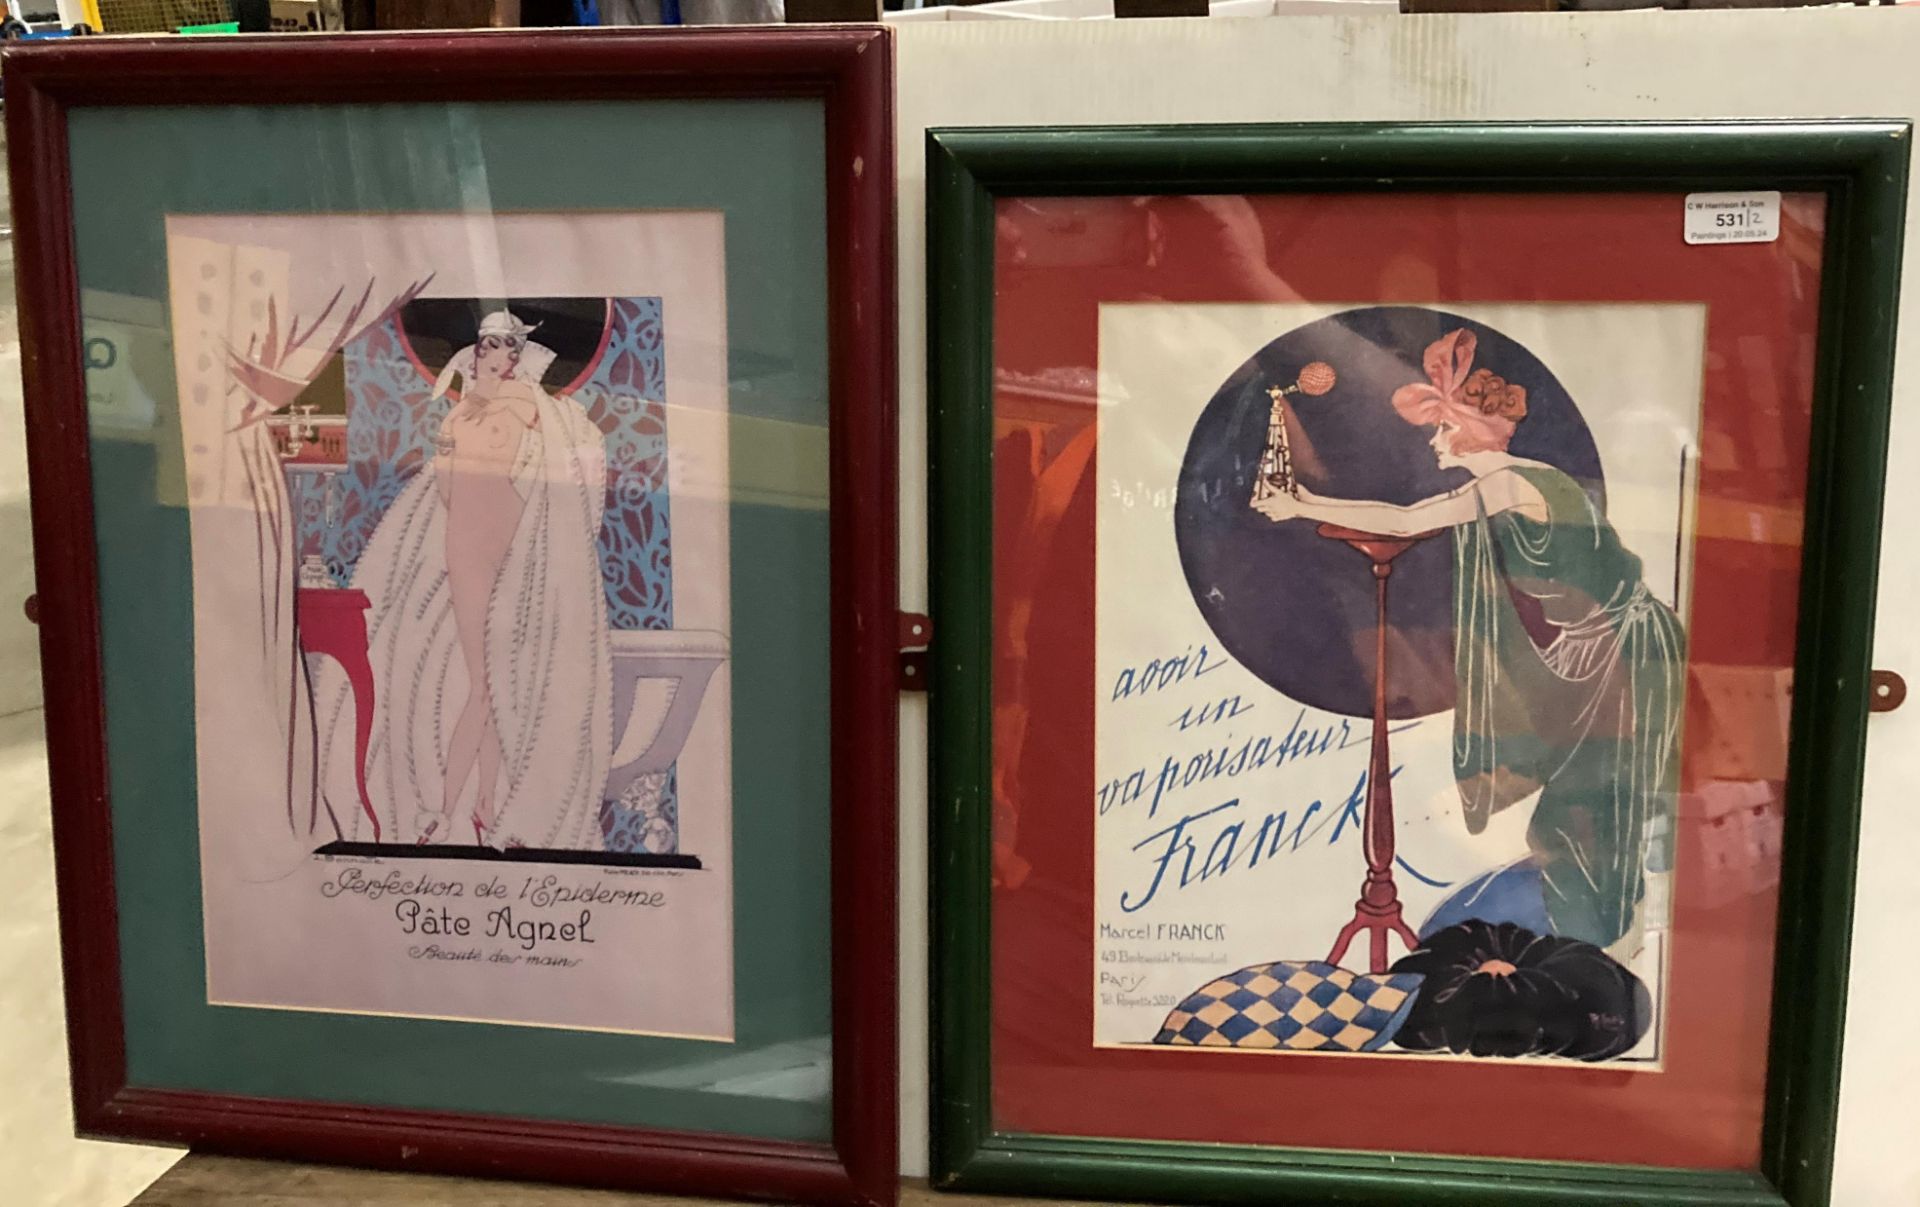 Two framed reproduction adverts for French perfume 'Pate Agnel' 40cm x 26cm and 'Marcel Franck'